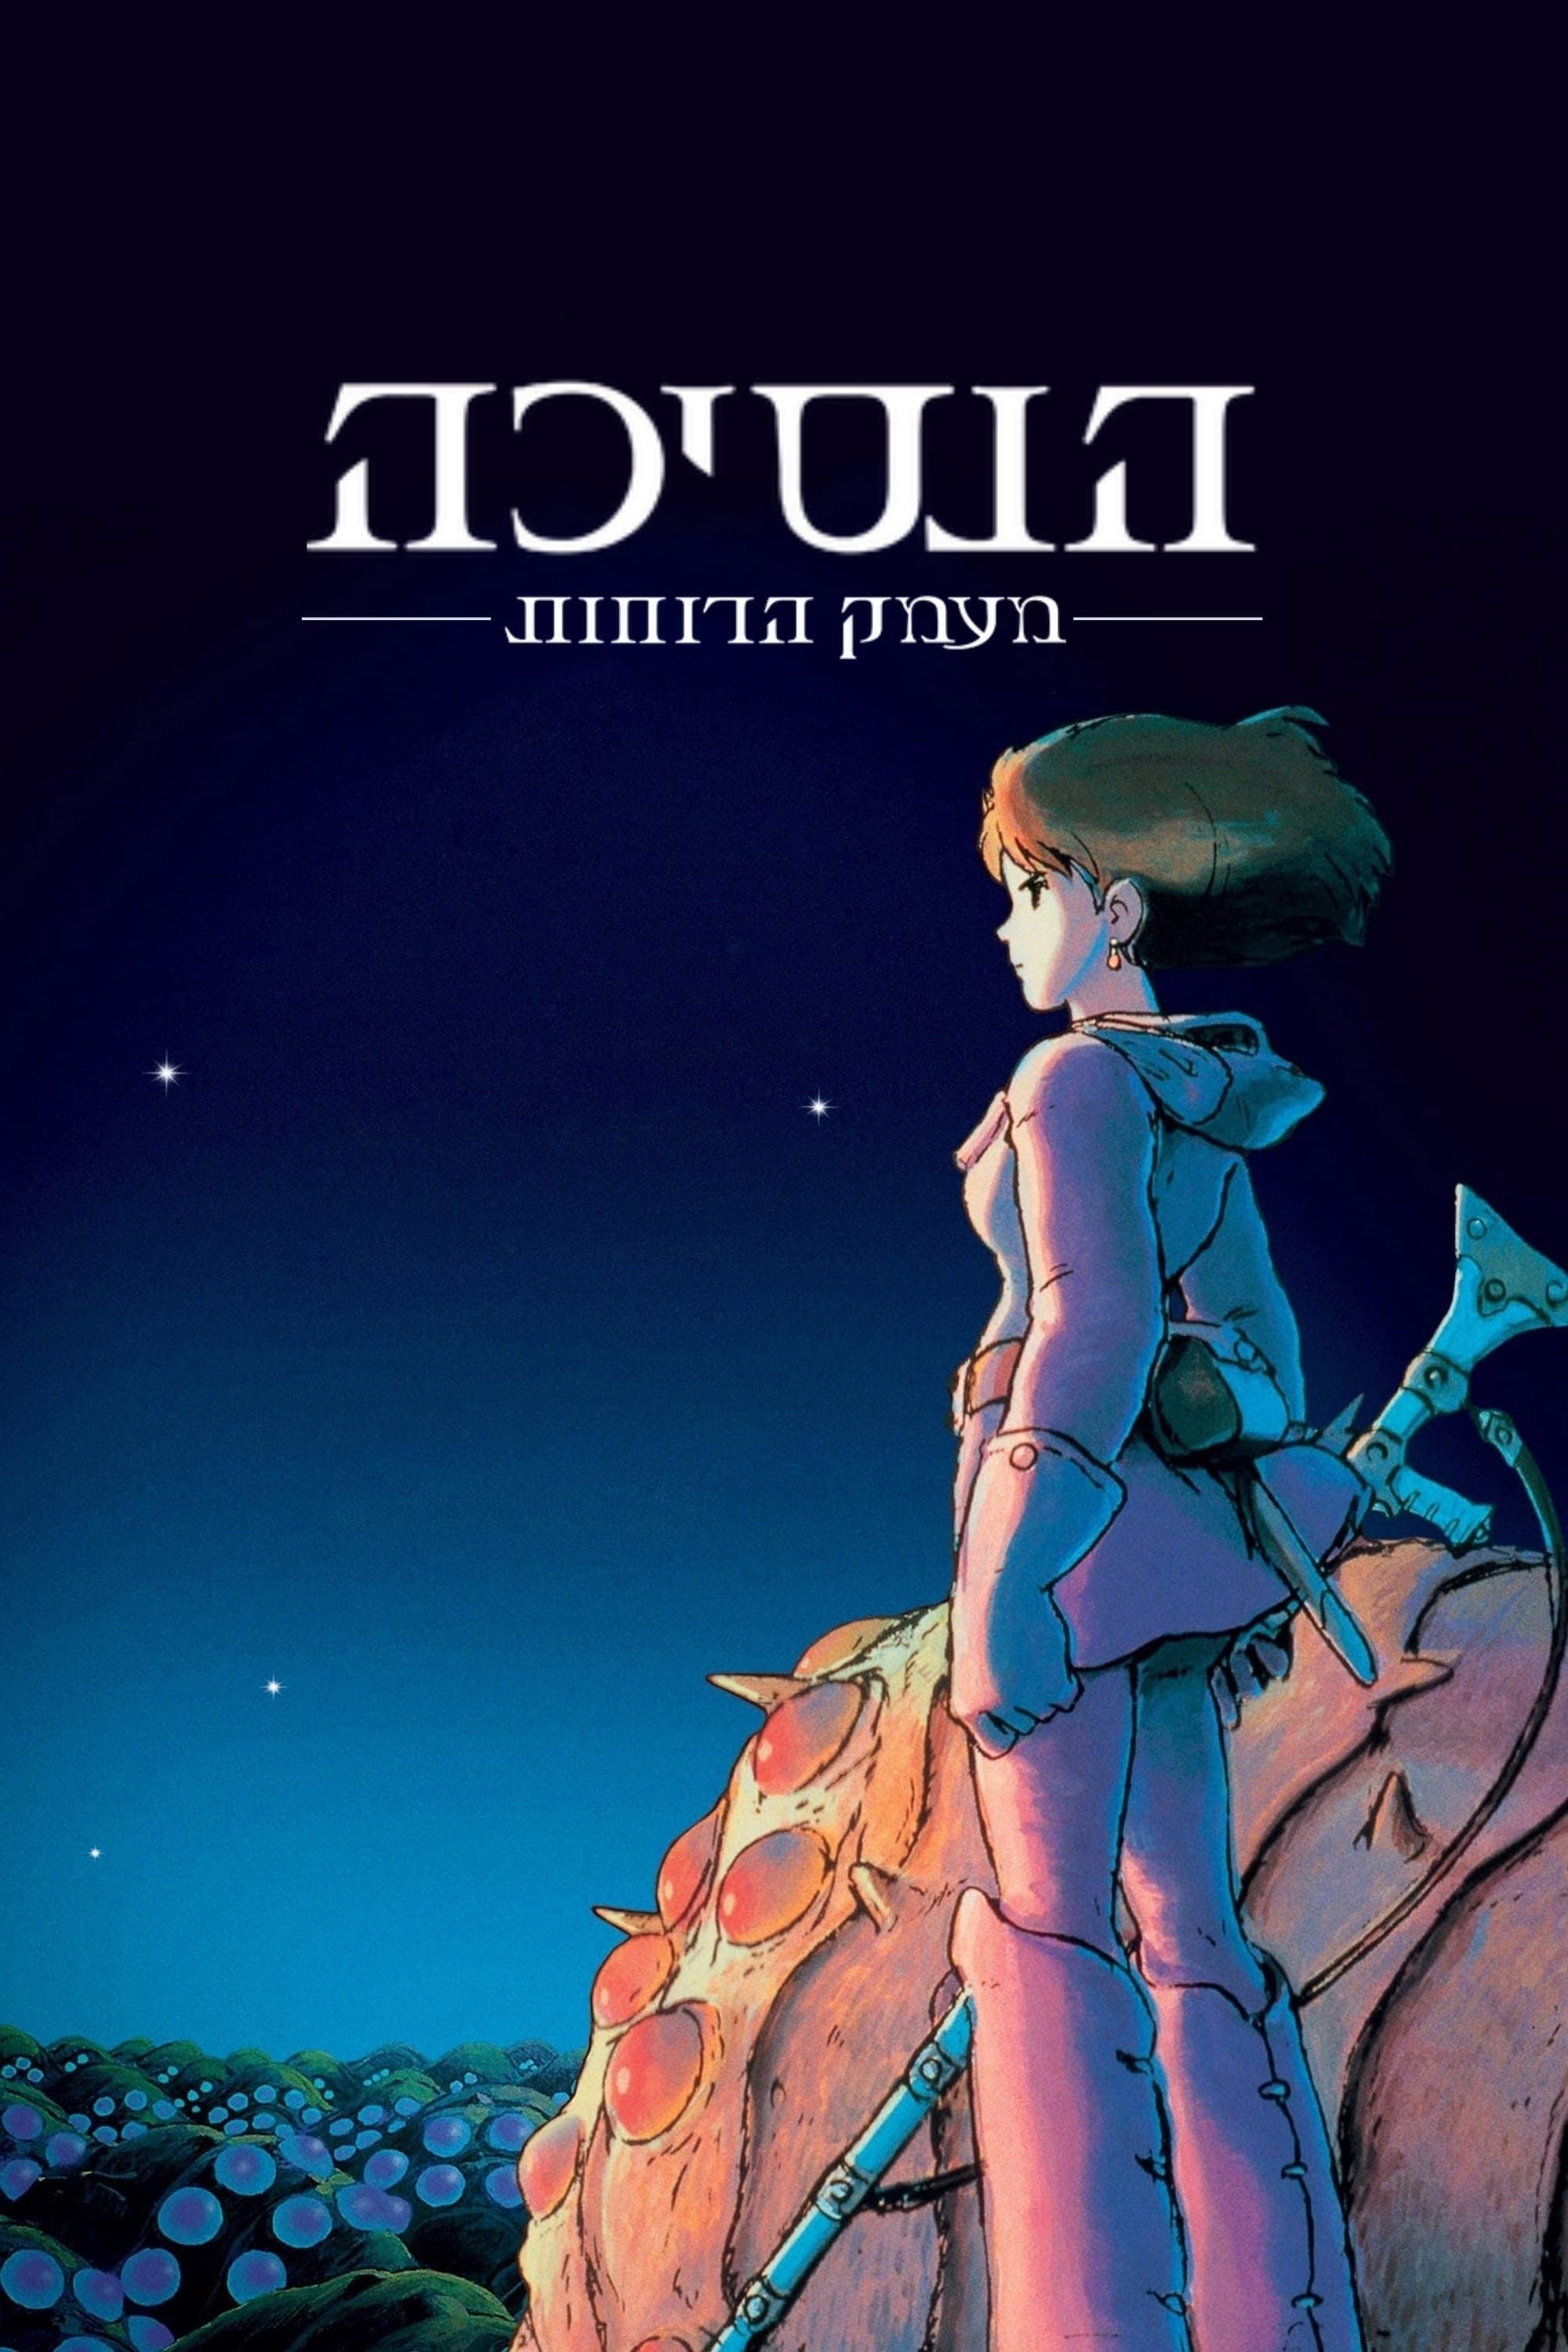 Nausicaa of the Valley of the Wind (Dub) (Movie) Hot Anime